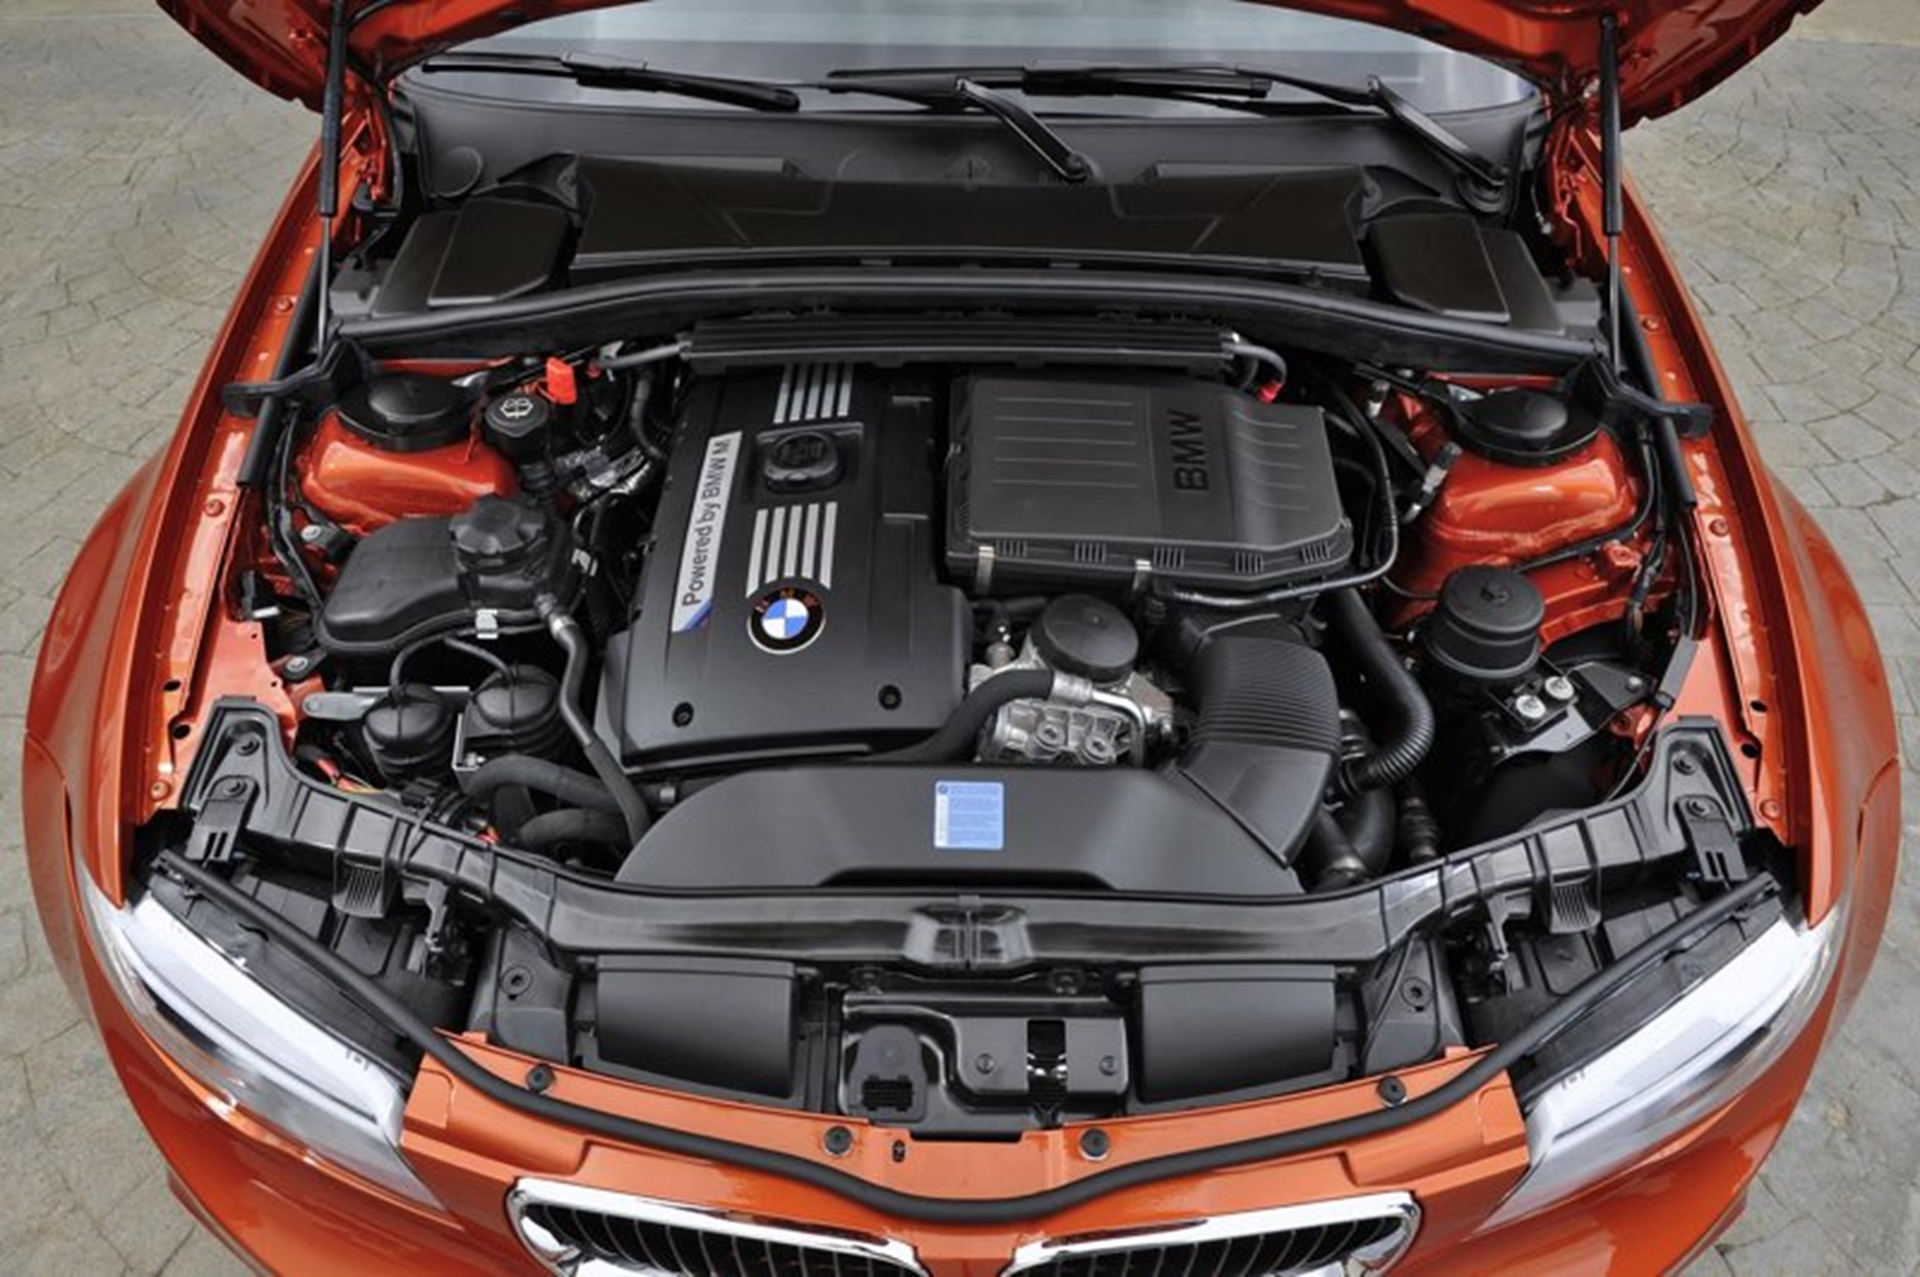 The new BMW 1 Series M Coupe Engine